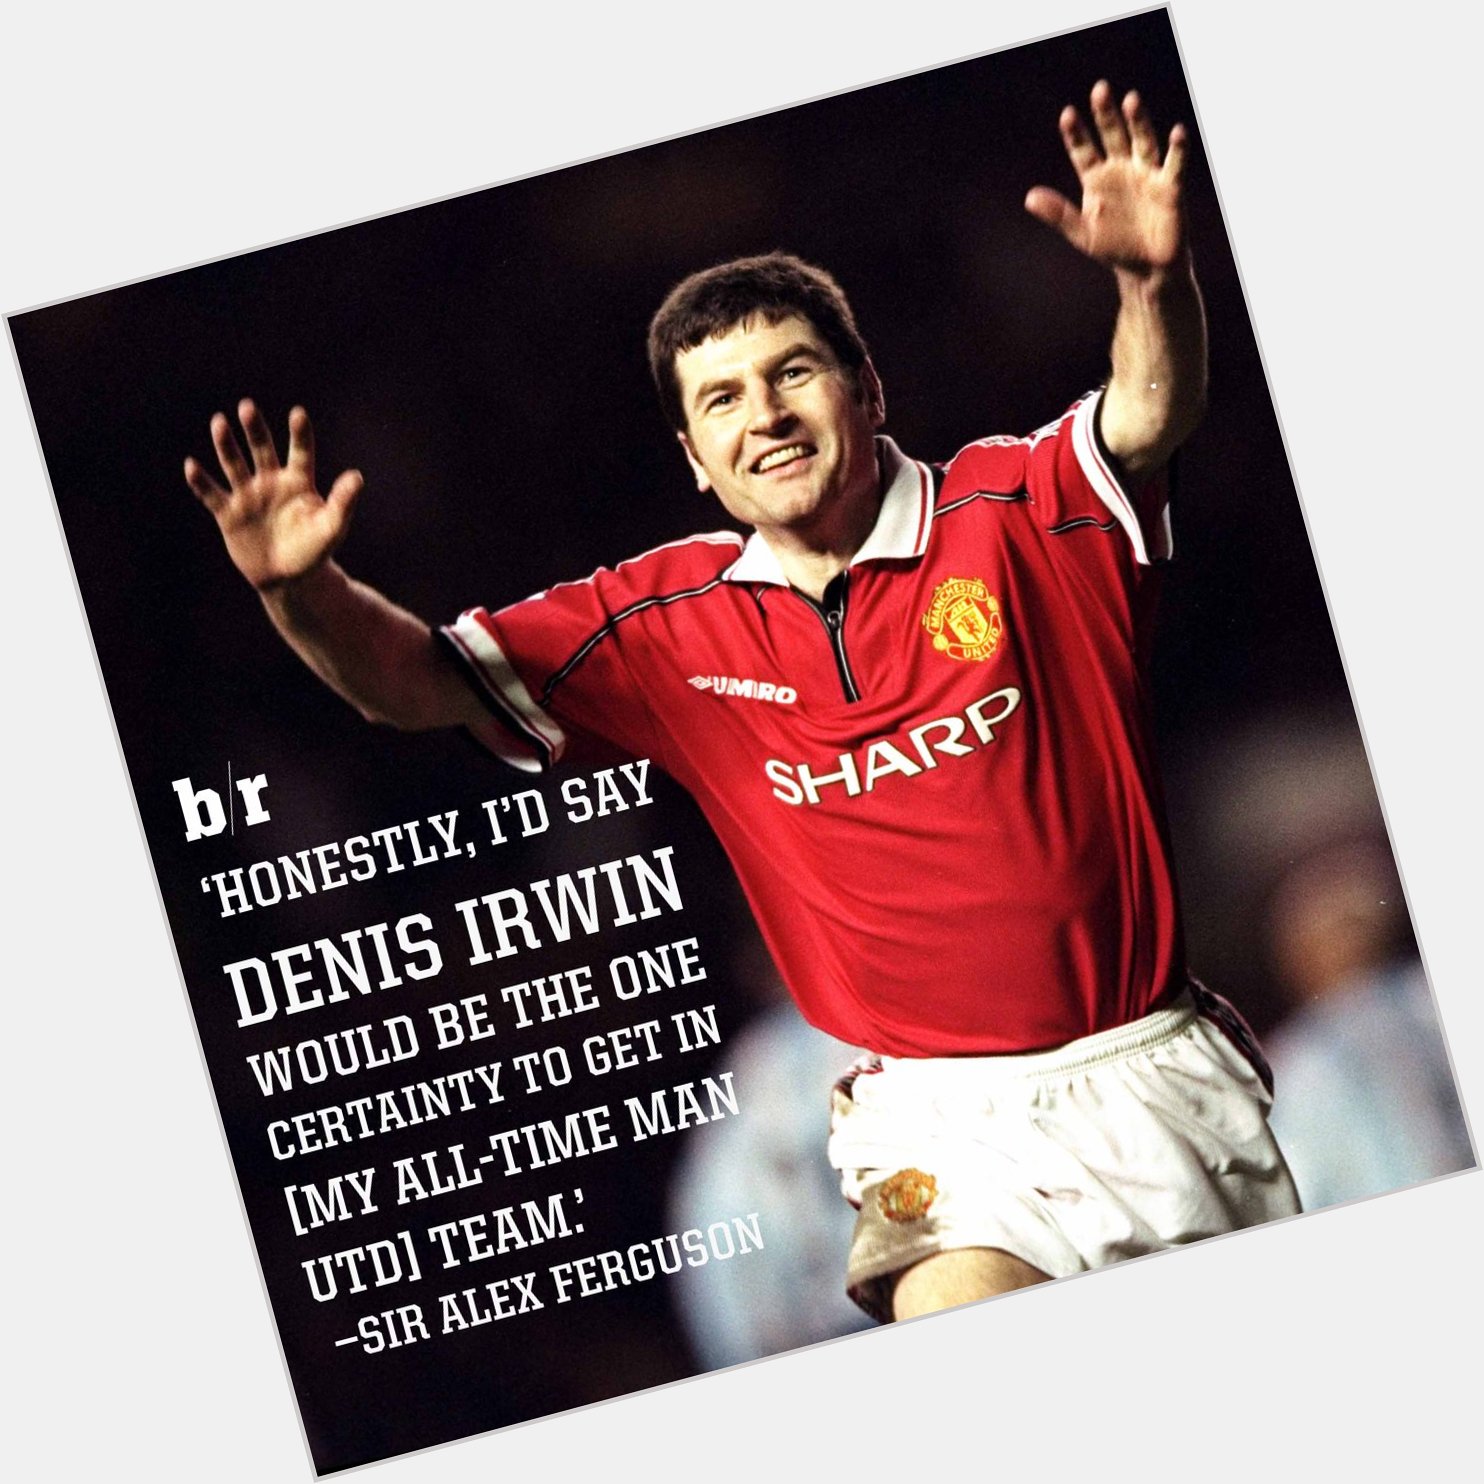 Happy birthday to a and legend, Denis Irwin, who turns 50 today. 